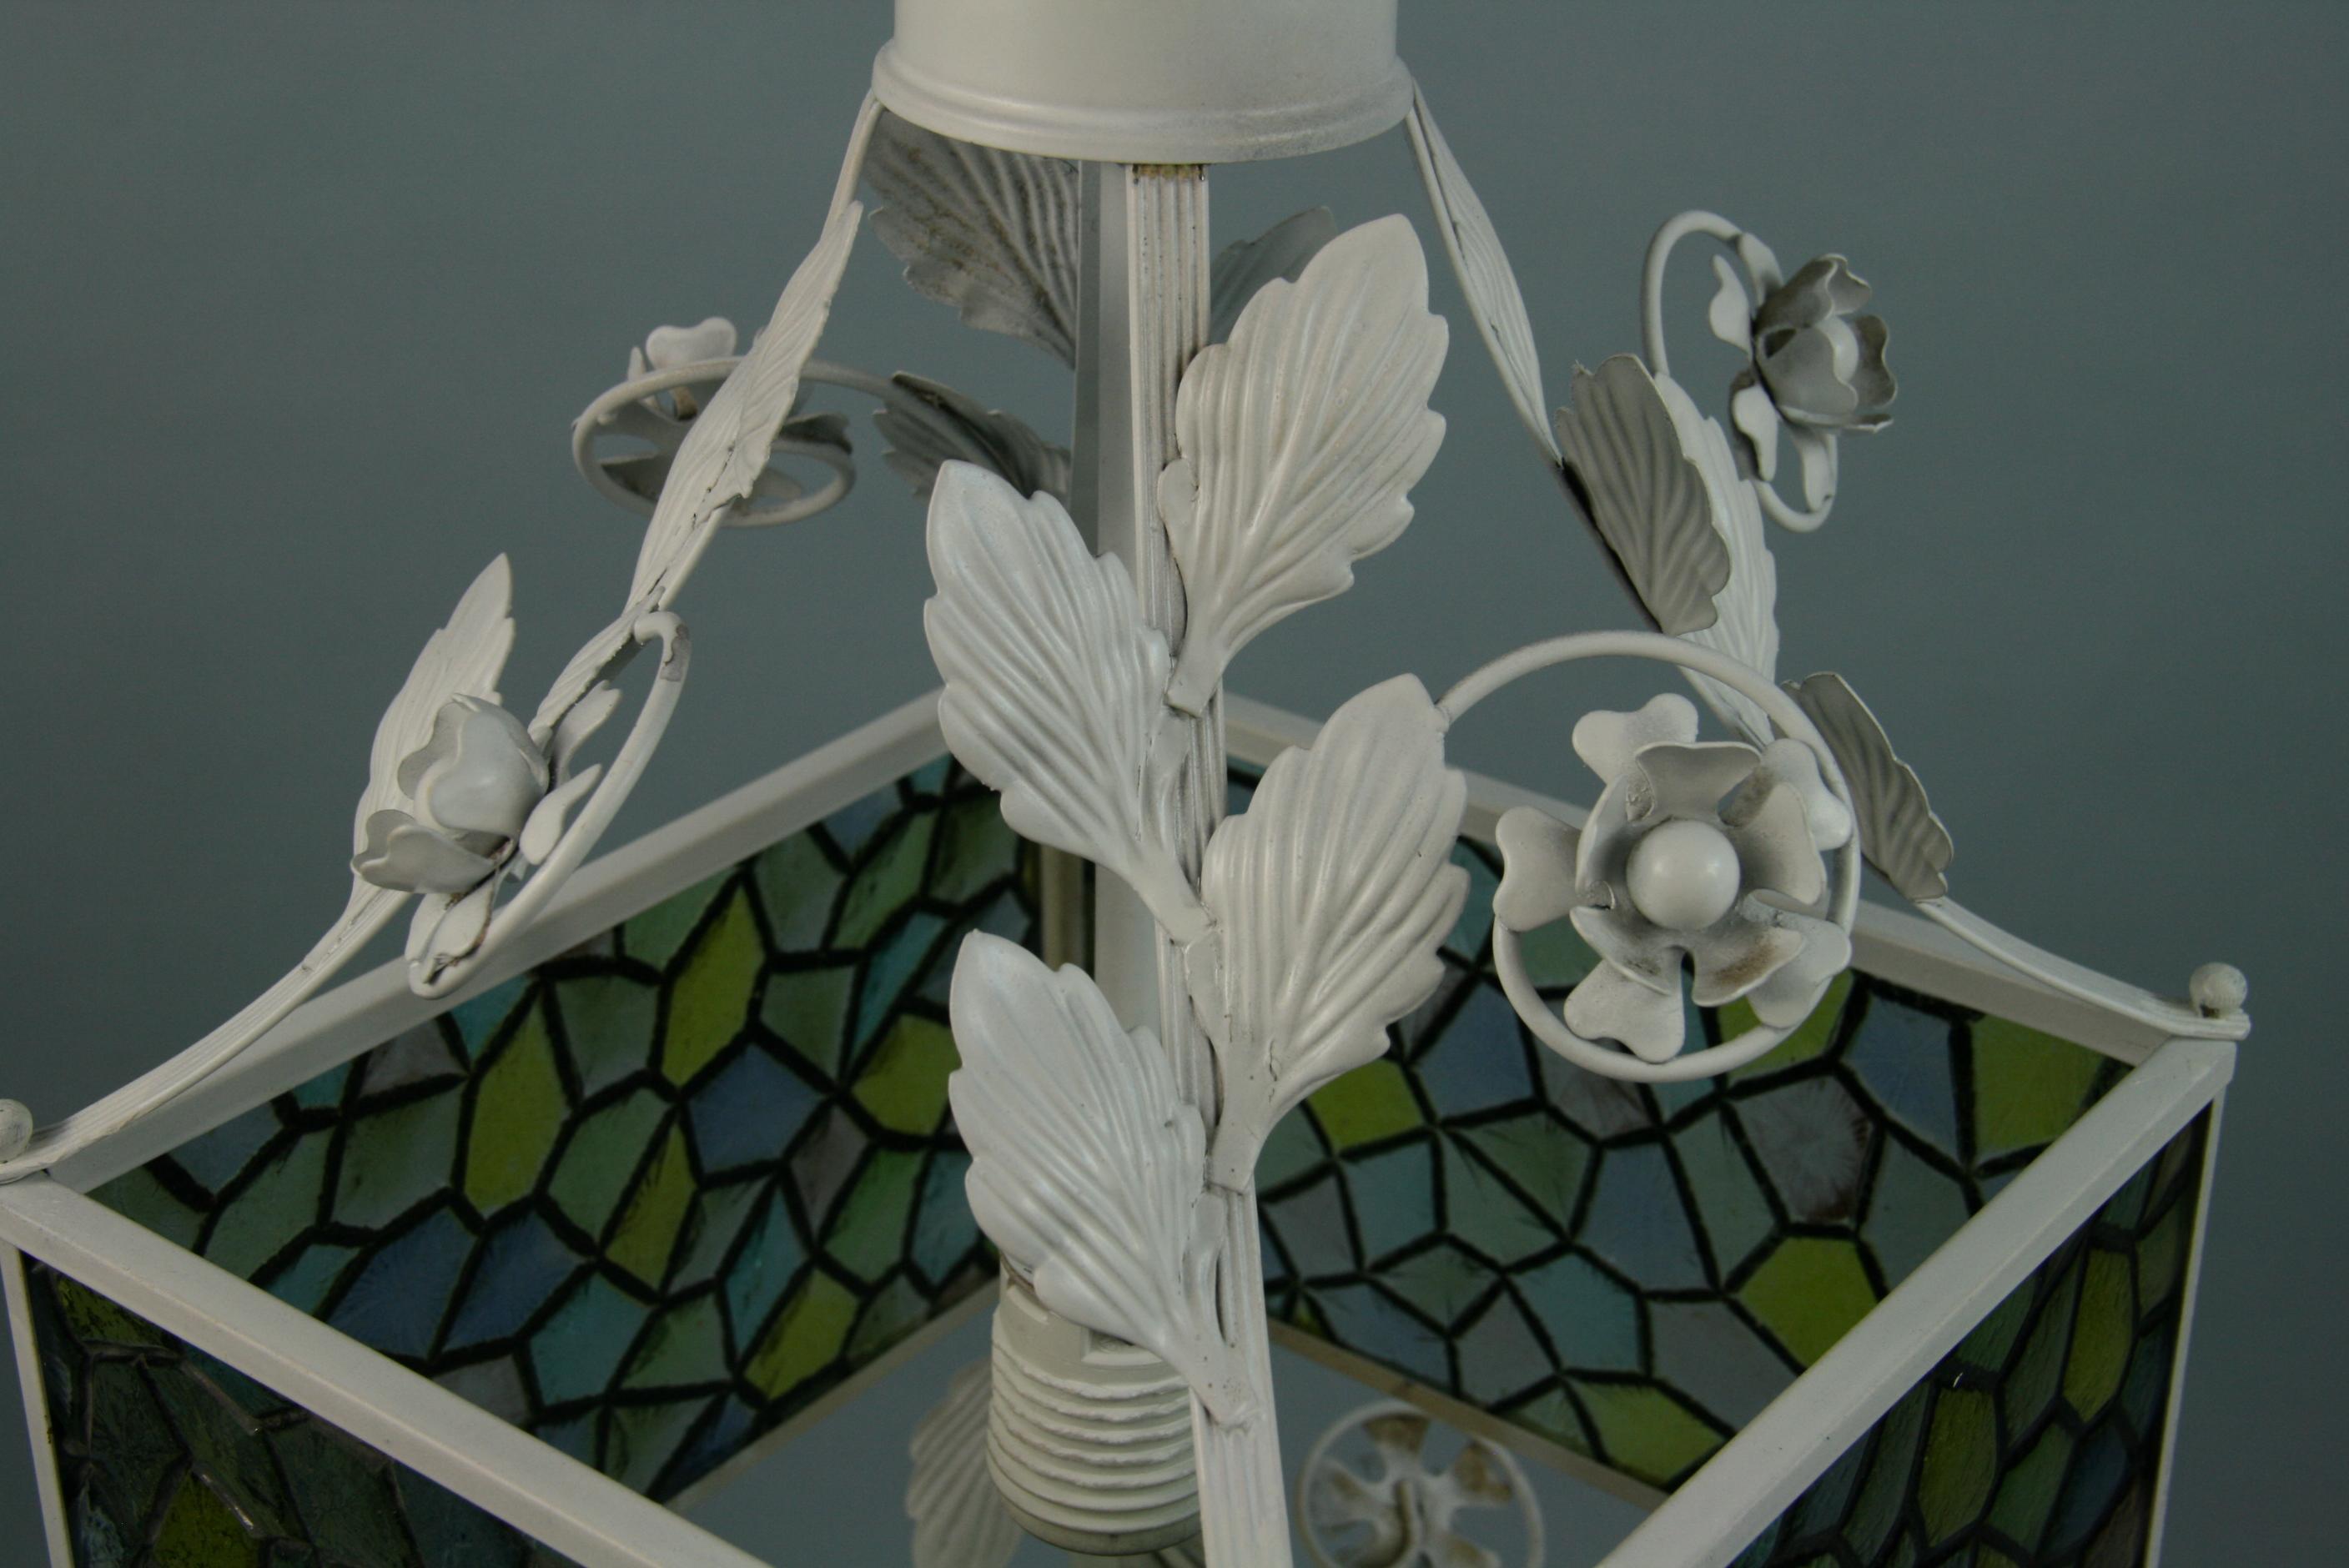 Metal Blue Stain Glass Leaves and Flower Pendant Light For Sale